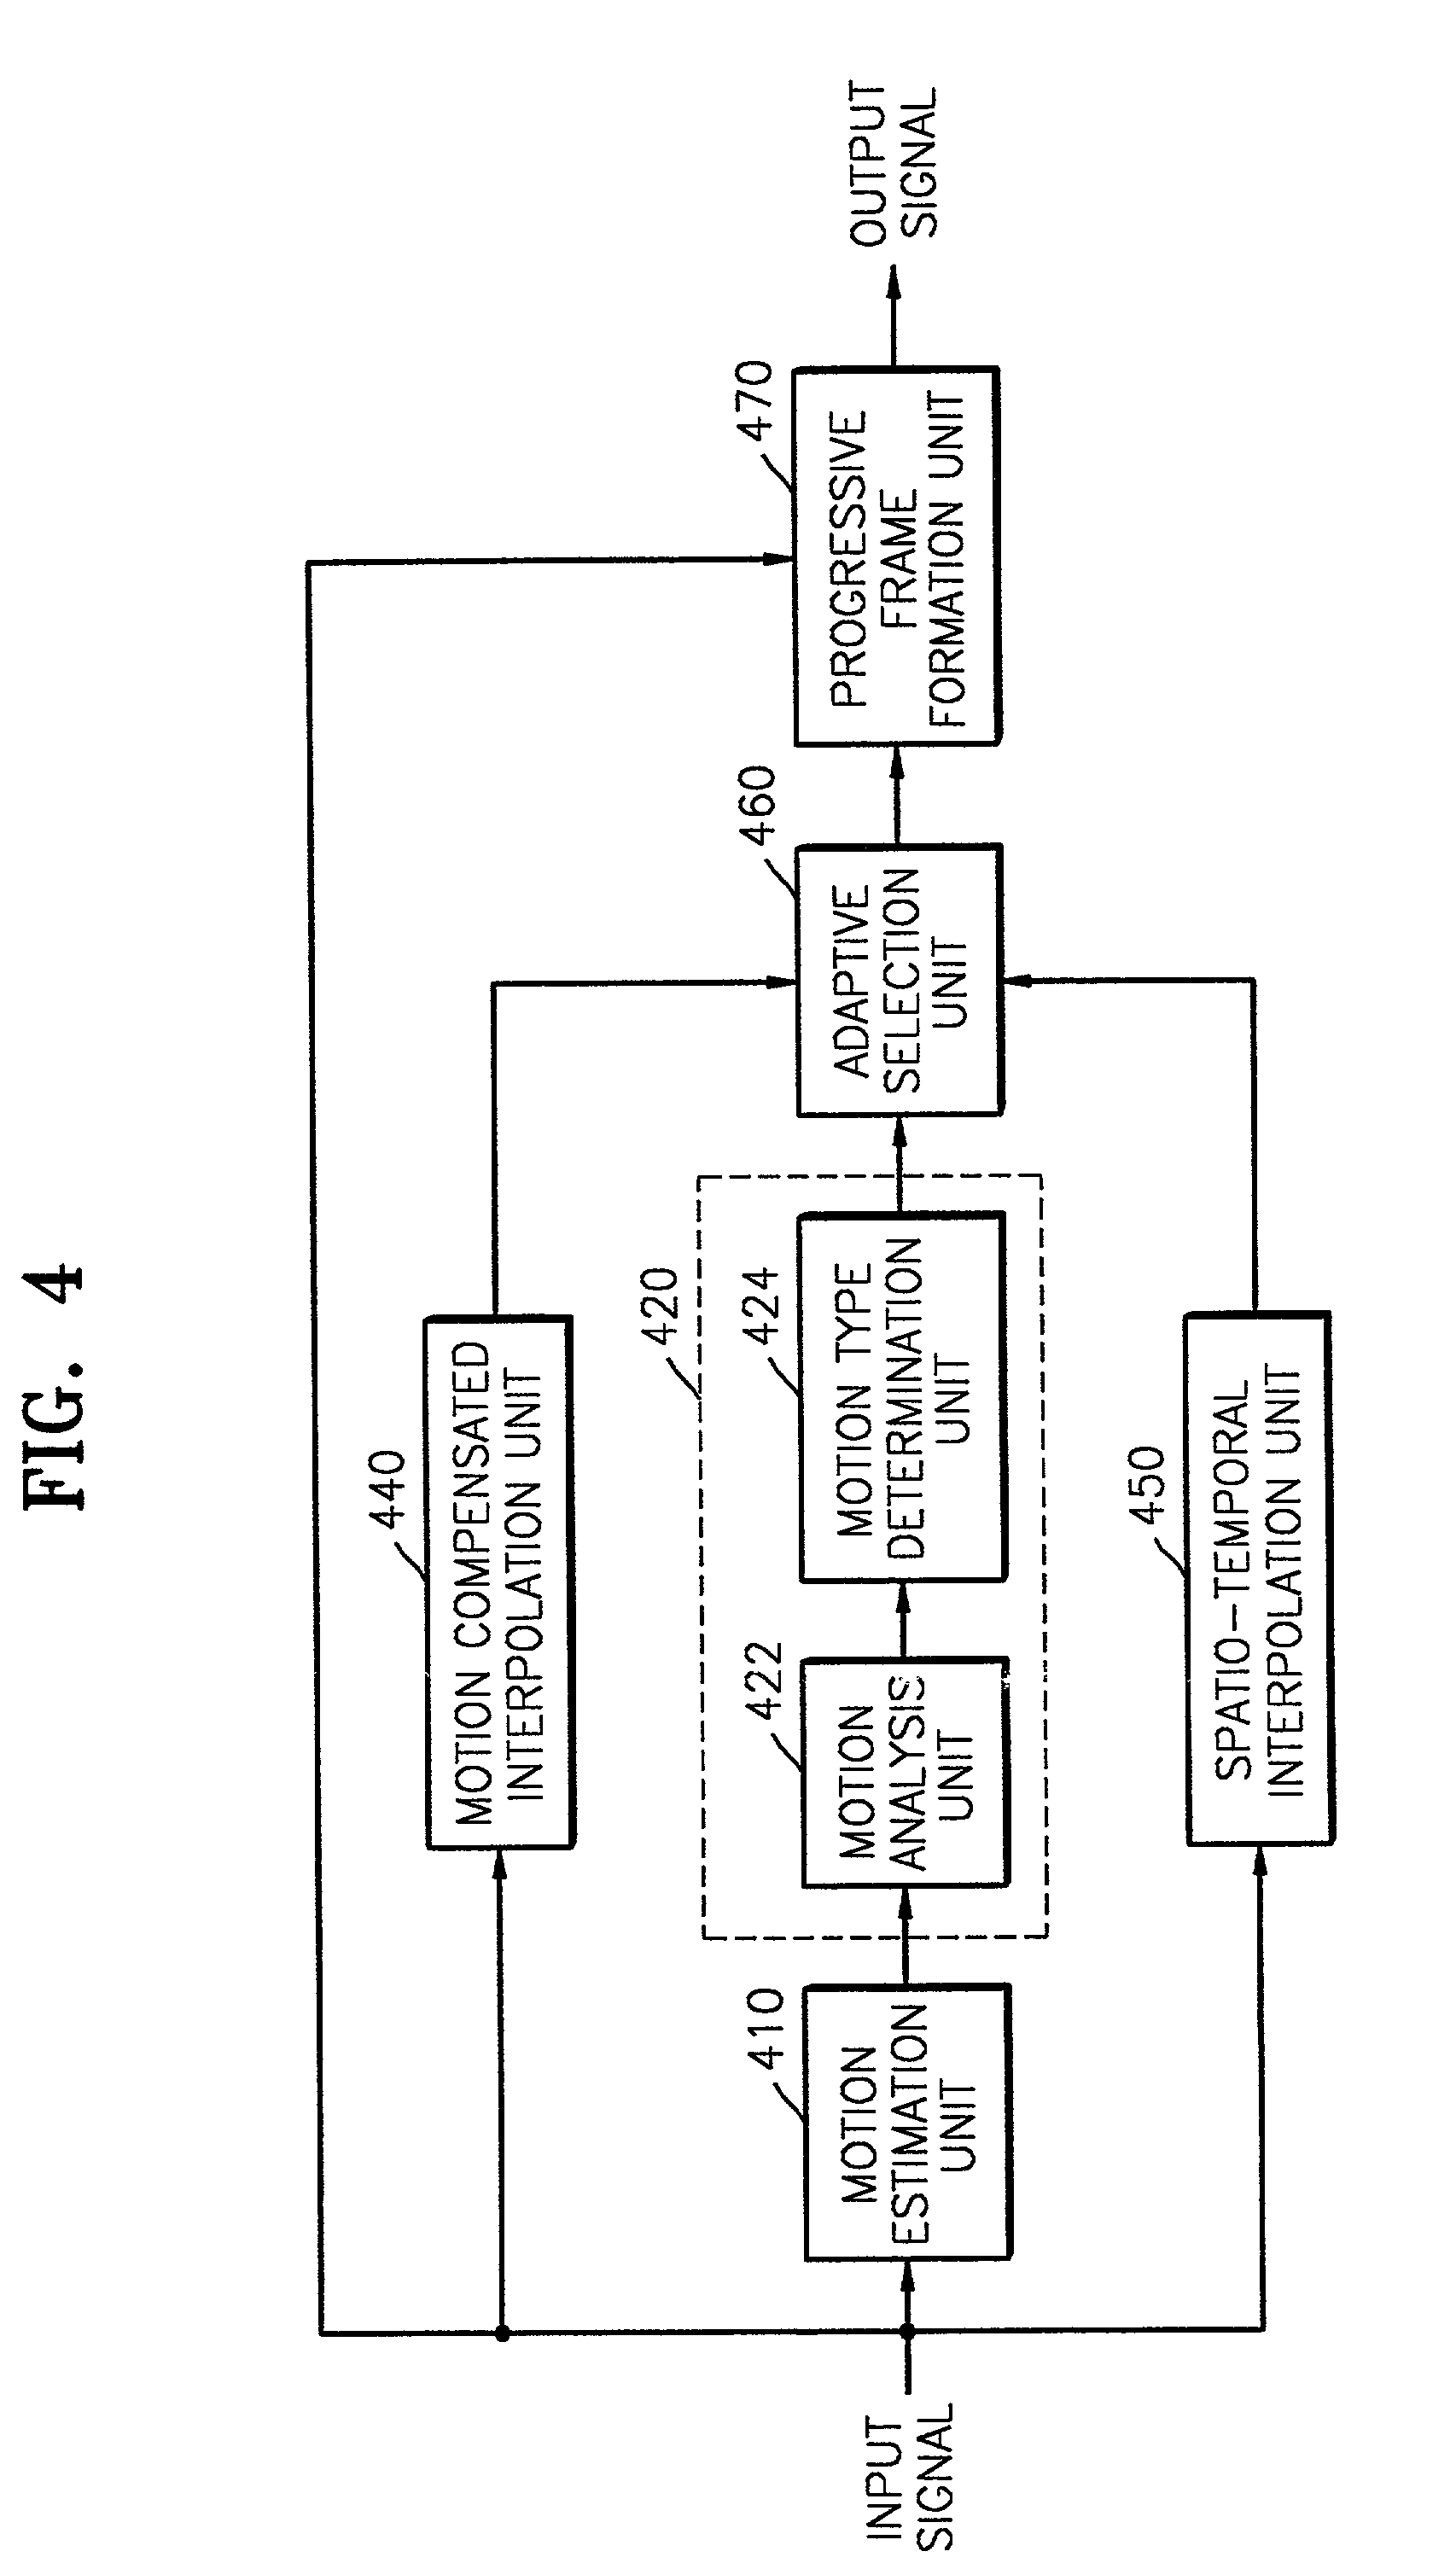 Apparatus and method for adaptive motion compensated de-interlacing of video data